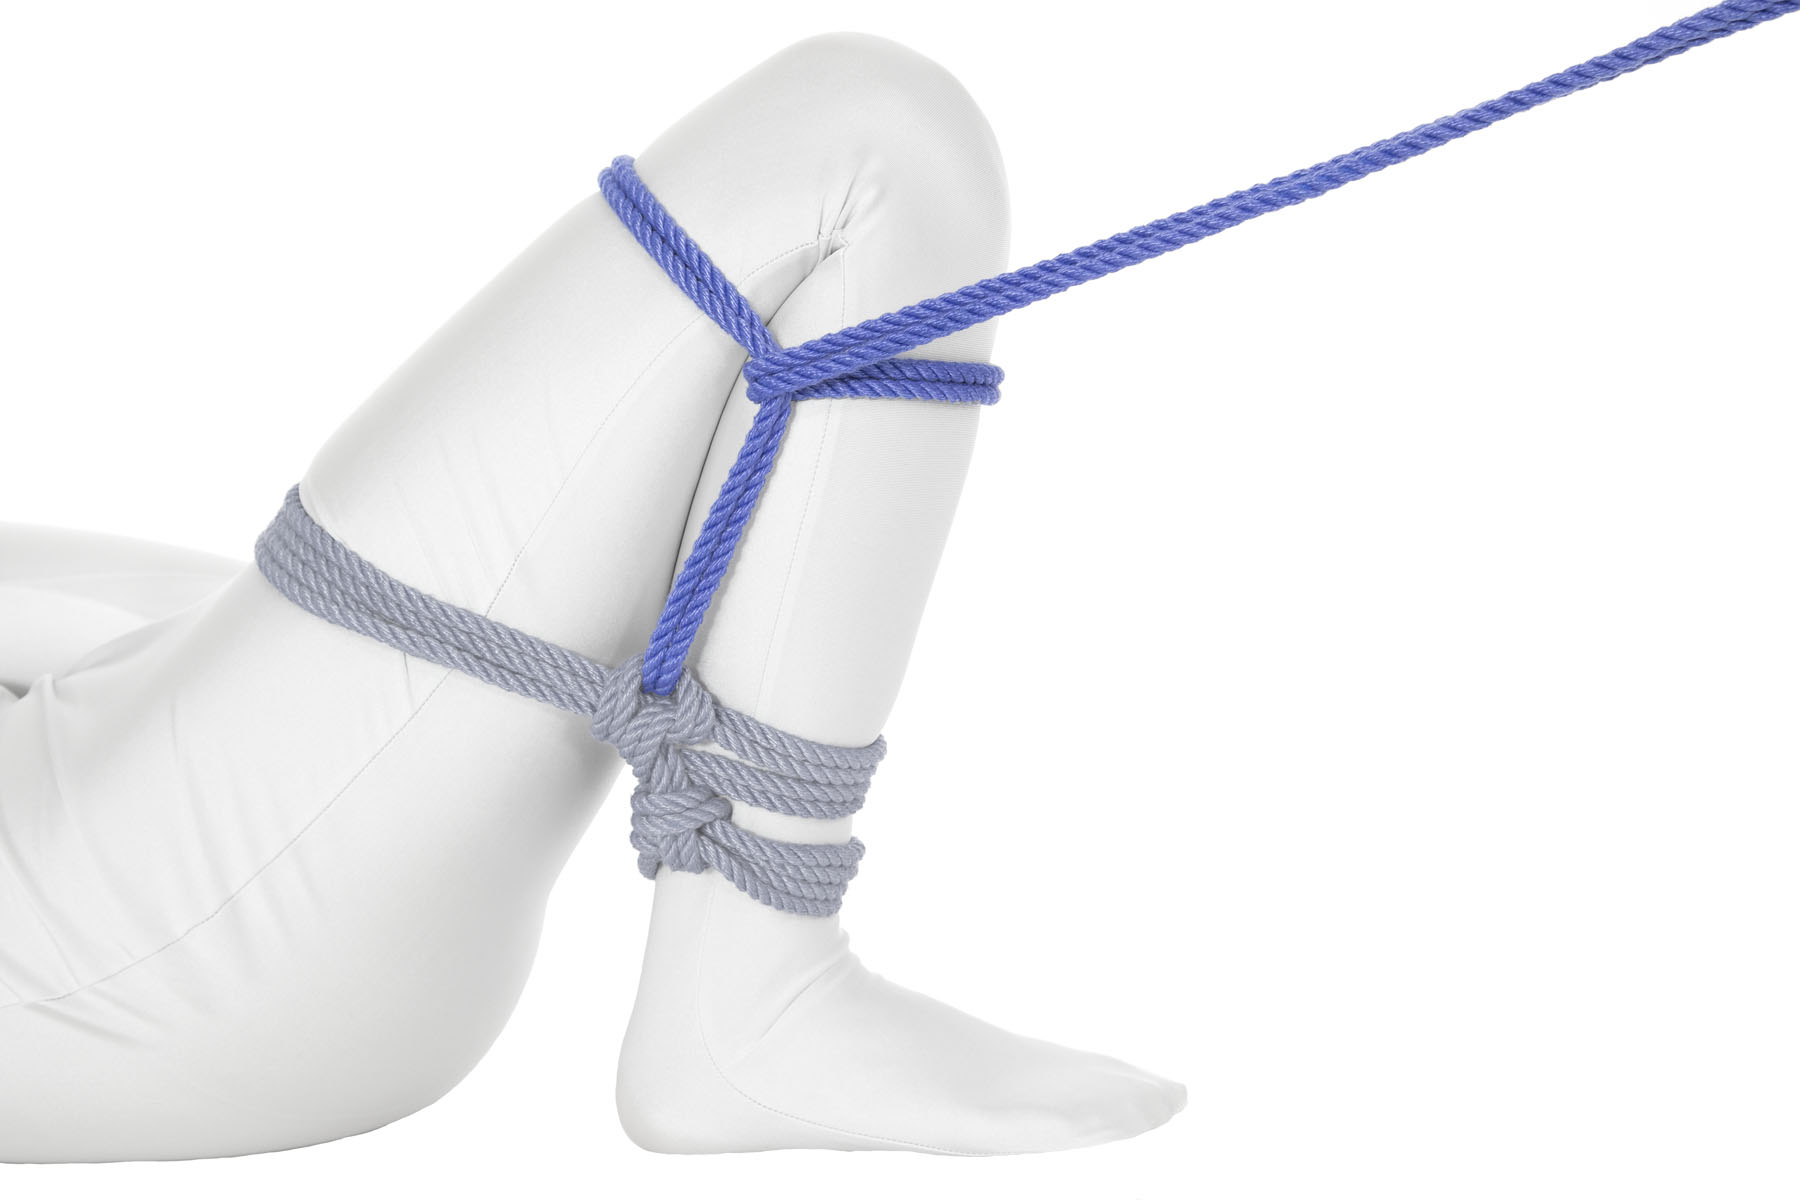 The rope travels straight up the leg, over the crease between the calf and the thigh. It stops about six inches below the knee and makes a 90 degree turn to the left. It goes clockwise all the way around the leg and then crosses under itself and reverses direction, making a ladder rung.